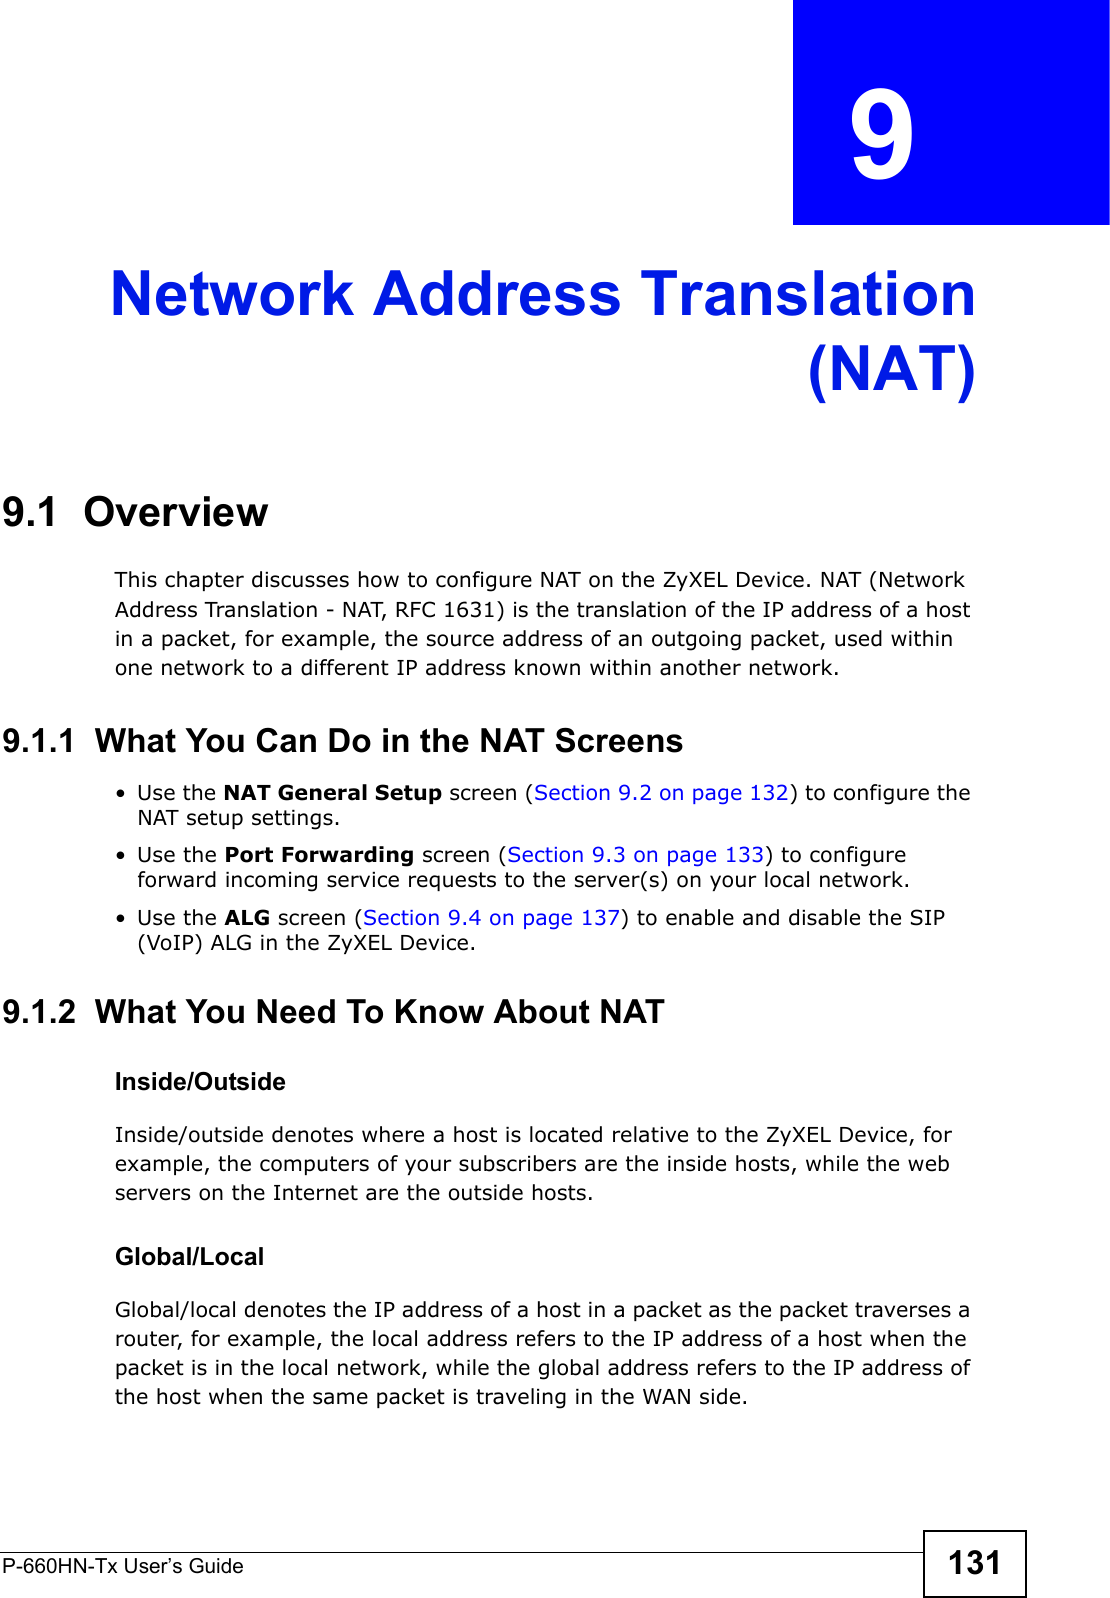 P-660HN-Tx User’s Guide 131CHAPTER  9 Network Address Translation(NAT)9.1  OverviewThis chapter discusses how to configure NAT on the ZyXEL Device. NAT (Network Address Translation - NAT, RFC 1631) is the translation of the IP address of a host in a packet, for example, the source address of an outgoing packet, used within one network to a different IP address known within another network.9.1.1  What You Can Do in the NAT Screens•Use the NAT General Setup screen (Section 9.2 on page 132) to configure the NAT setup settings.•Use the Port Forwarding screen (Section 9.3 on page 133) to configure forward incoming service requests to the server(s) on your local network. •Use the ALG screen (Section 9.4 on page 137) to enable and disable the SIP (VoIP) ALG in the ZyXEL Device.9.1.2  What You Need To Know About NATInside/OutsideInside/outside denotes where a host is located relative to the ZyXEL Device, for example, the computers of your subscribers are the inside hosts, while the web servers on the Internet are the outside hosts. Global/LocalGlobal/local denotes the IP address of a host in a packet as the packet traverses a router, for example, the local address refers to the IP address of a host when the packet is in the local network, while the global address refers to the IP address of the host when the same packet is traveling in the WAN side. 